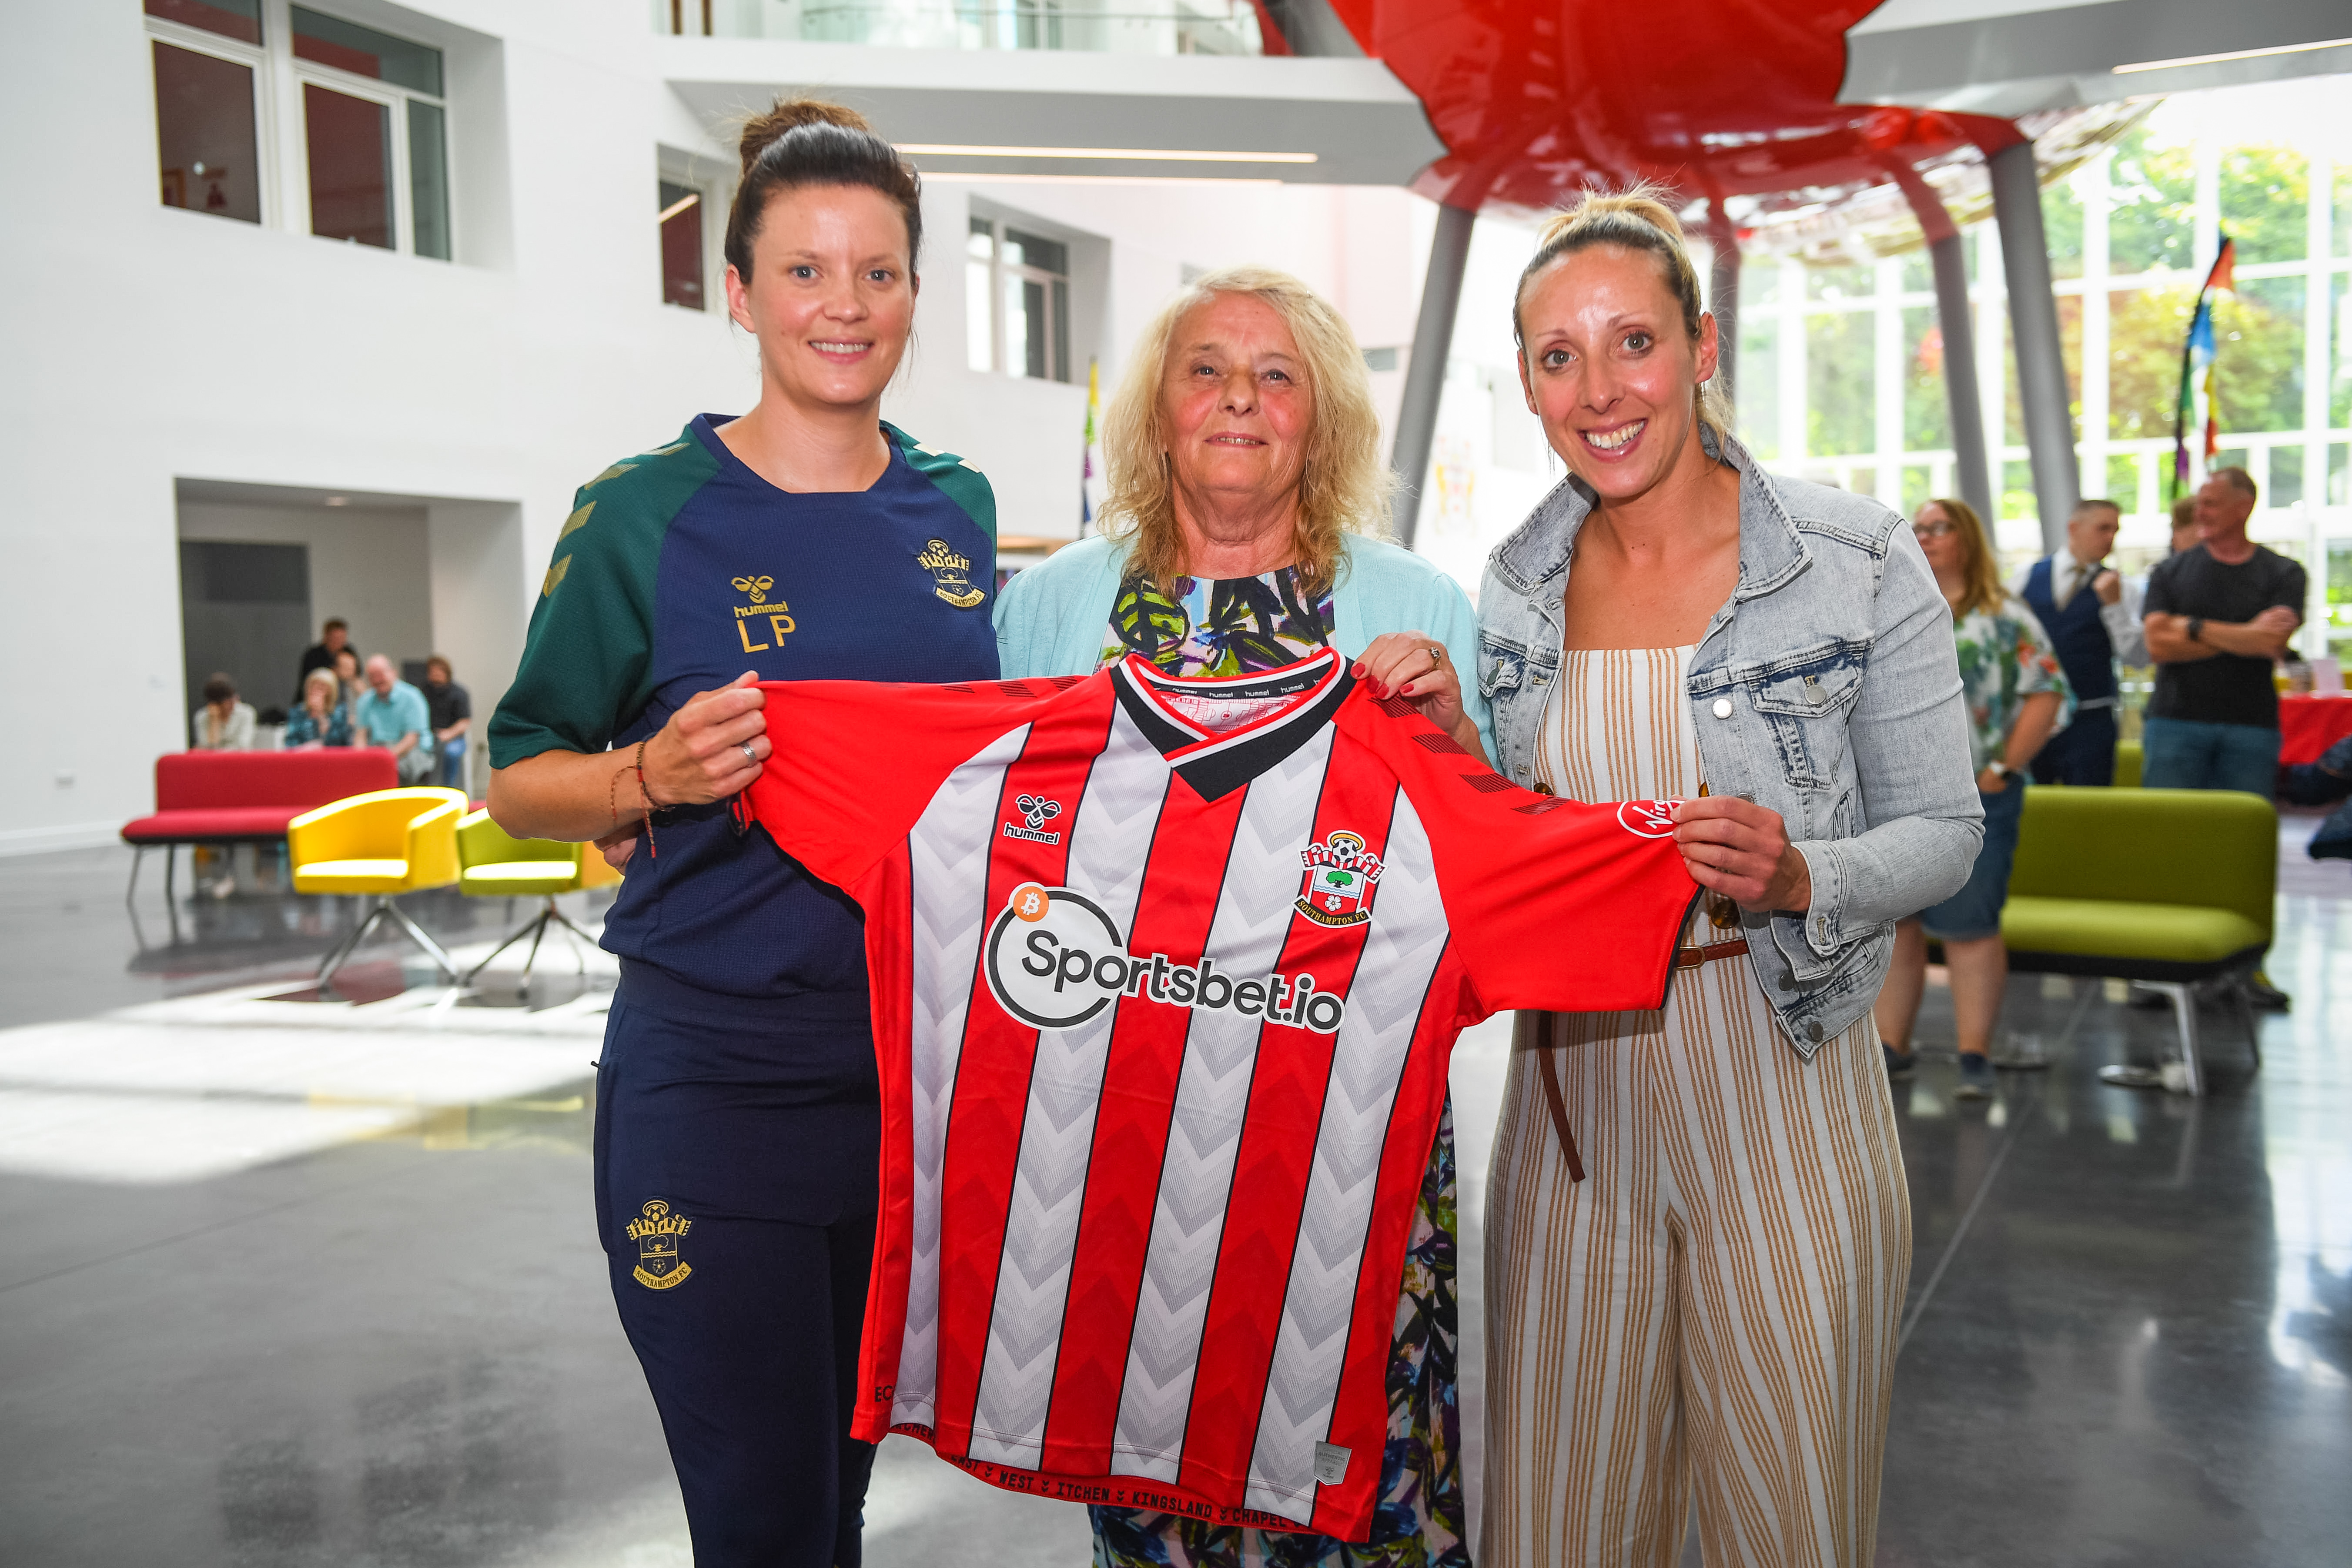 Lauren Phillips, Southampton Women's First Team coach and Shelly Provan who is the former Southampton Women's captain